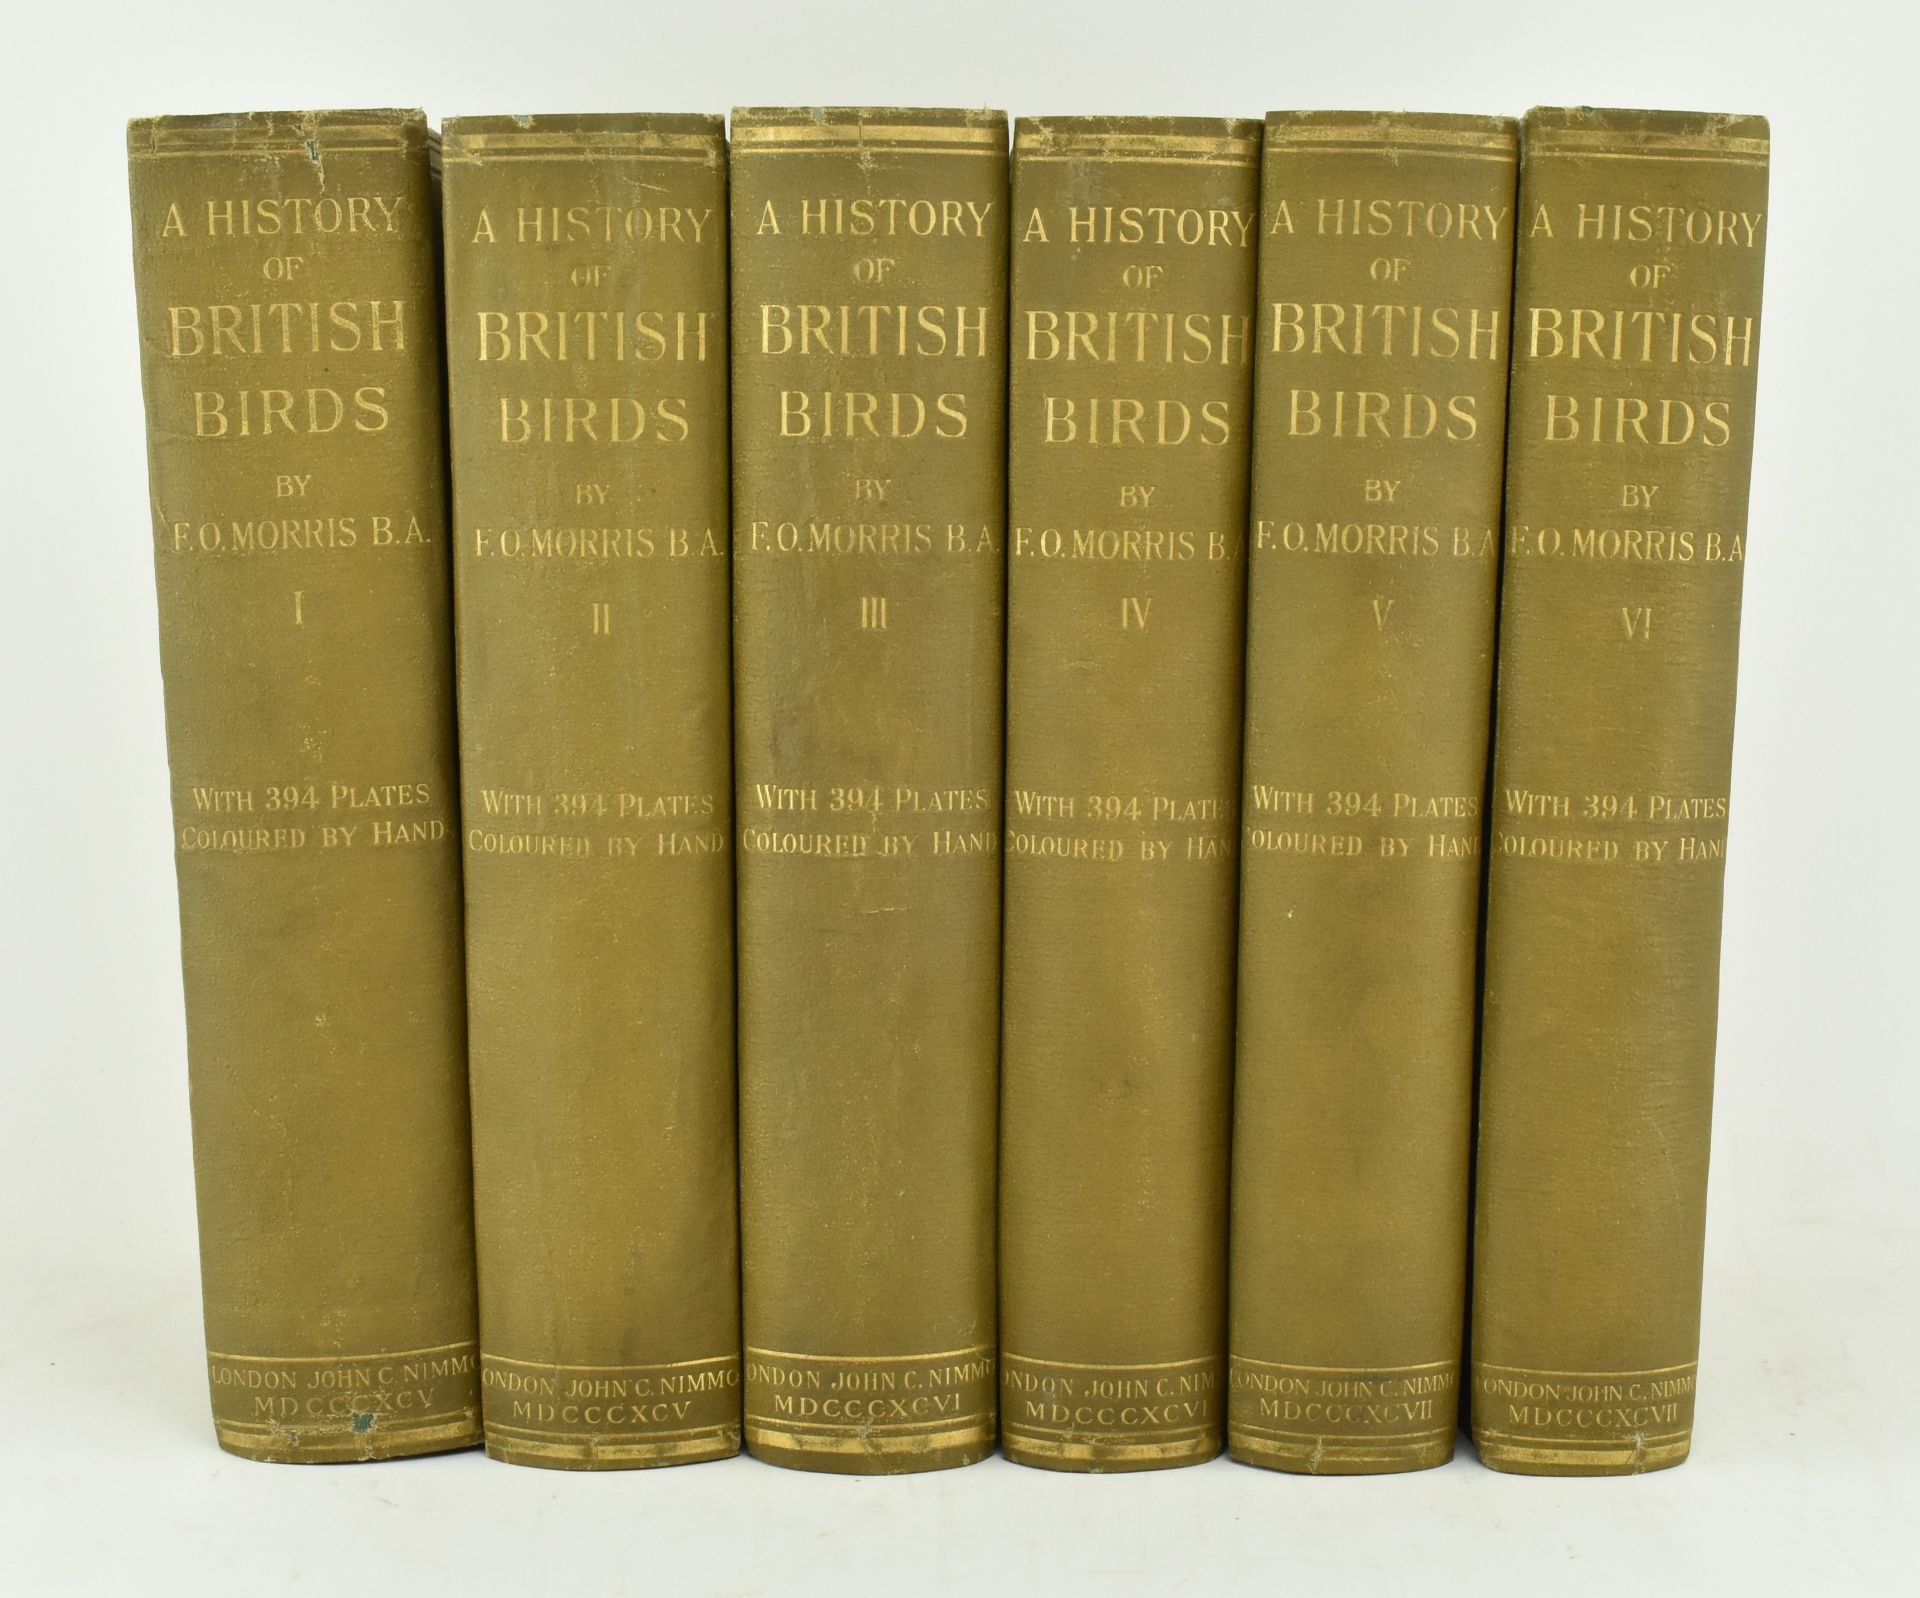 MORRIS, F. O. A HISTORY OF BRITISH BIRDS, 4TH ED IN SIX VOLUMES - Image 2 of 8